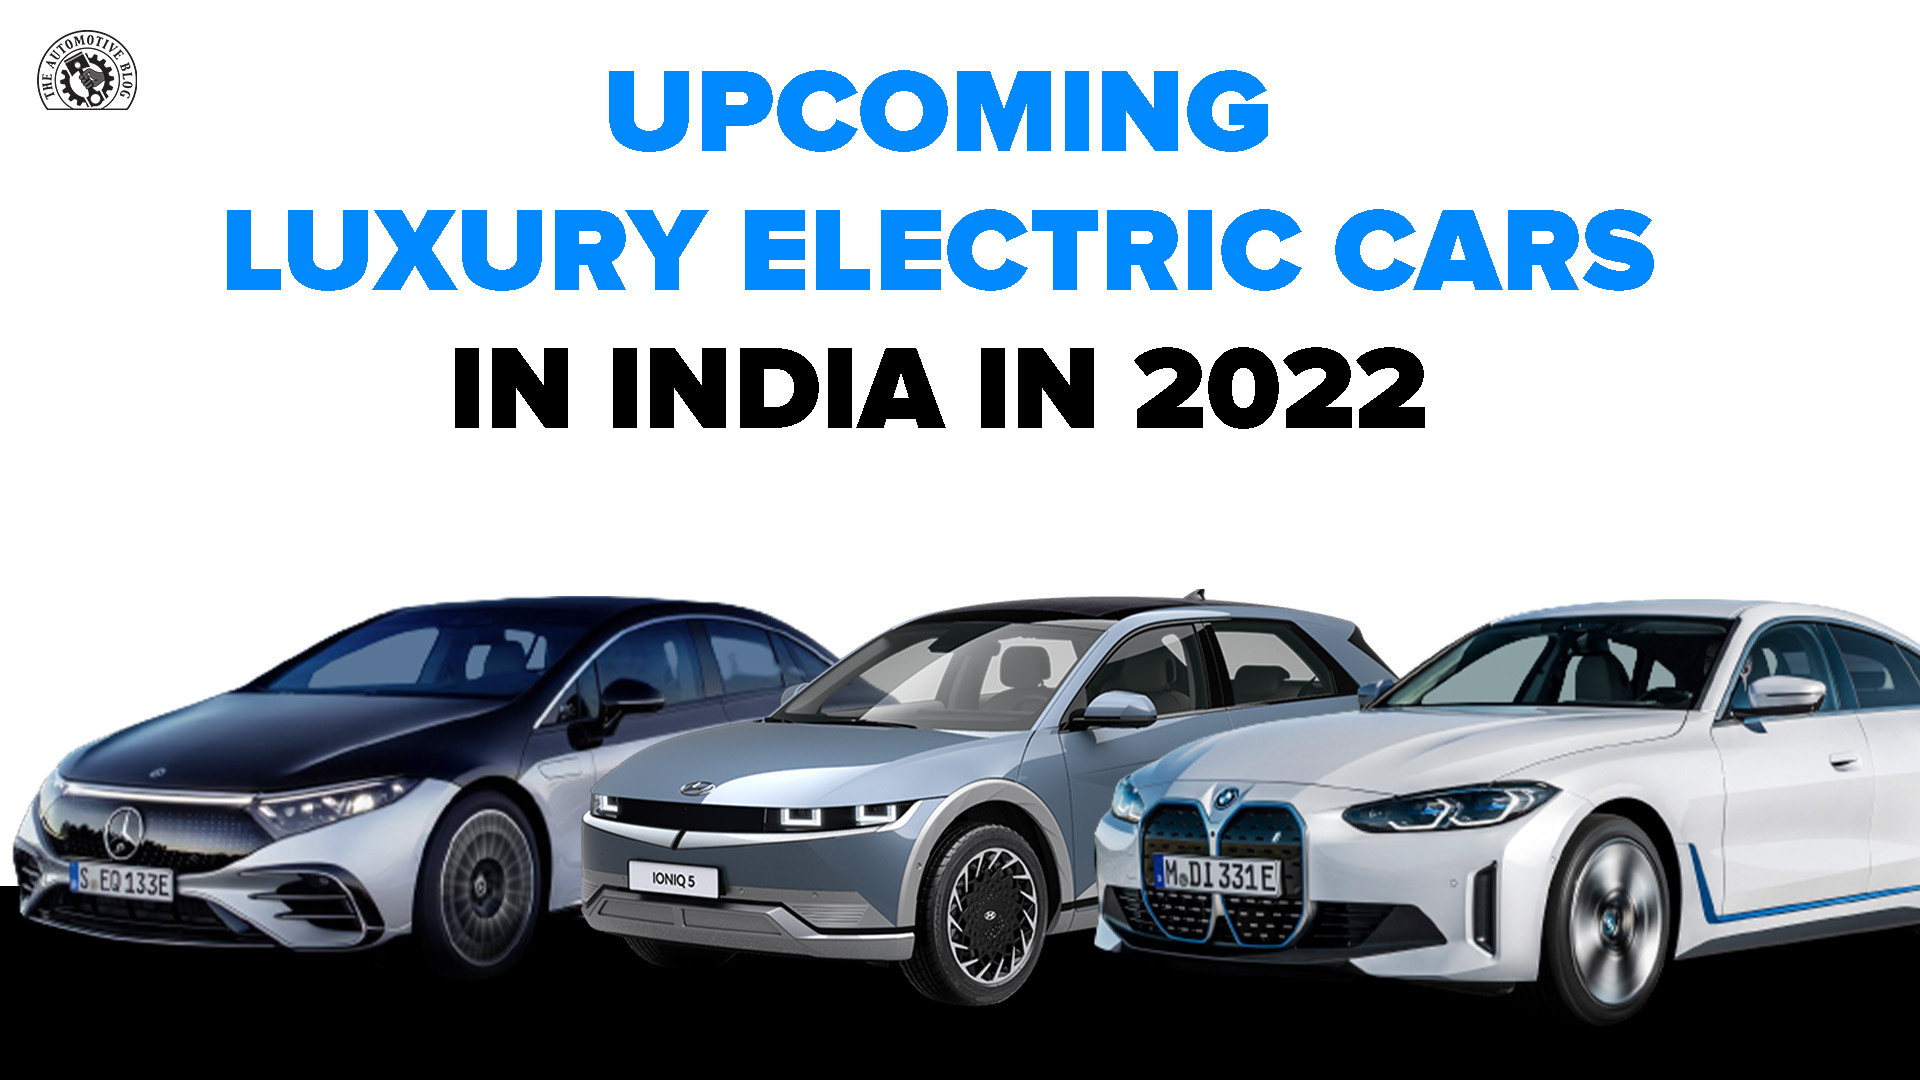 Upcoming Luxury Electric Cars in India in 2022